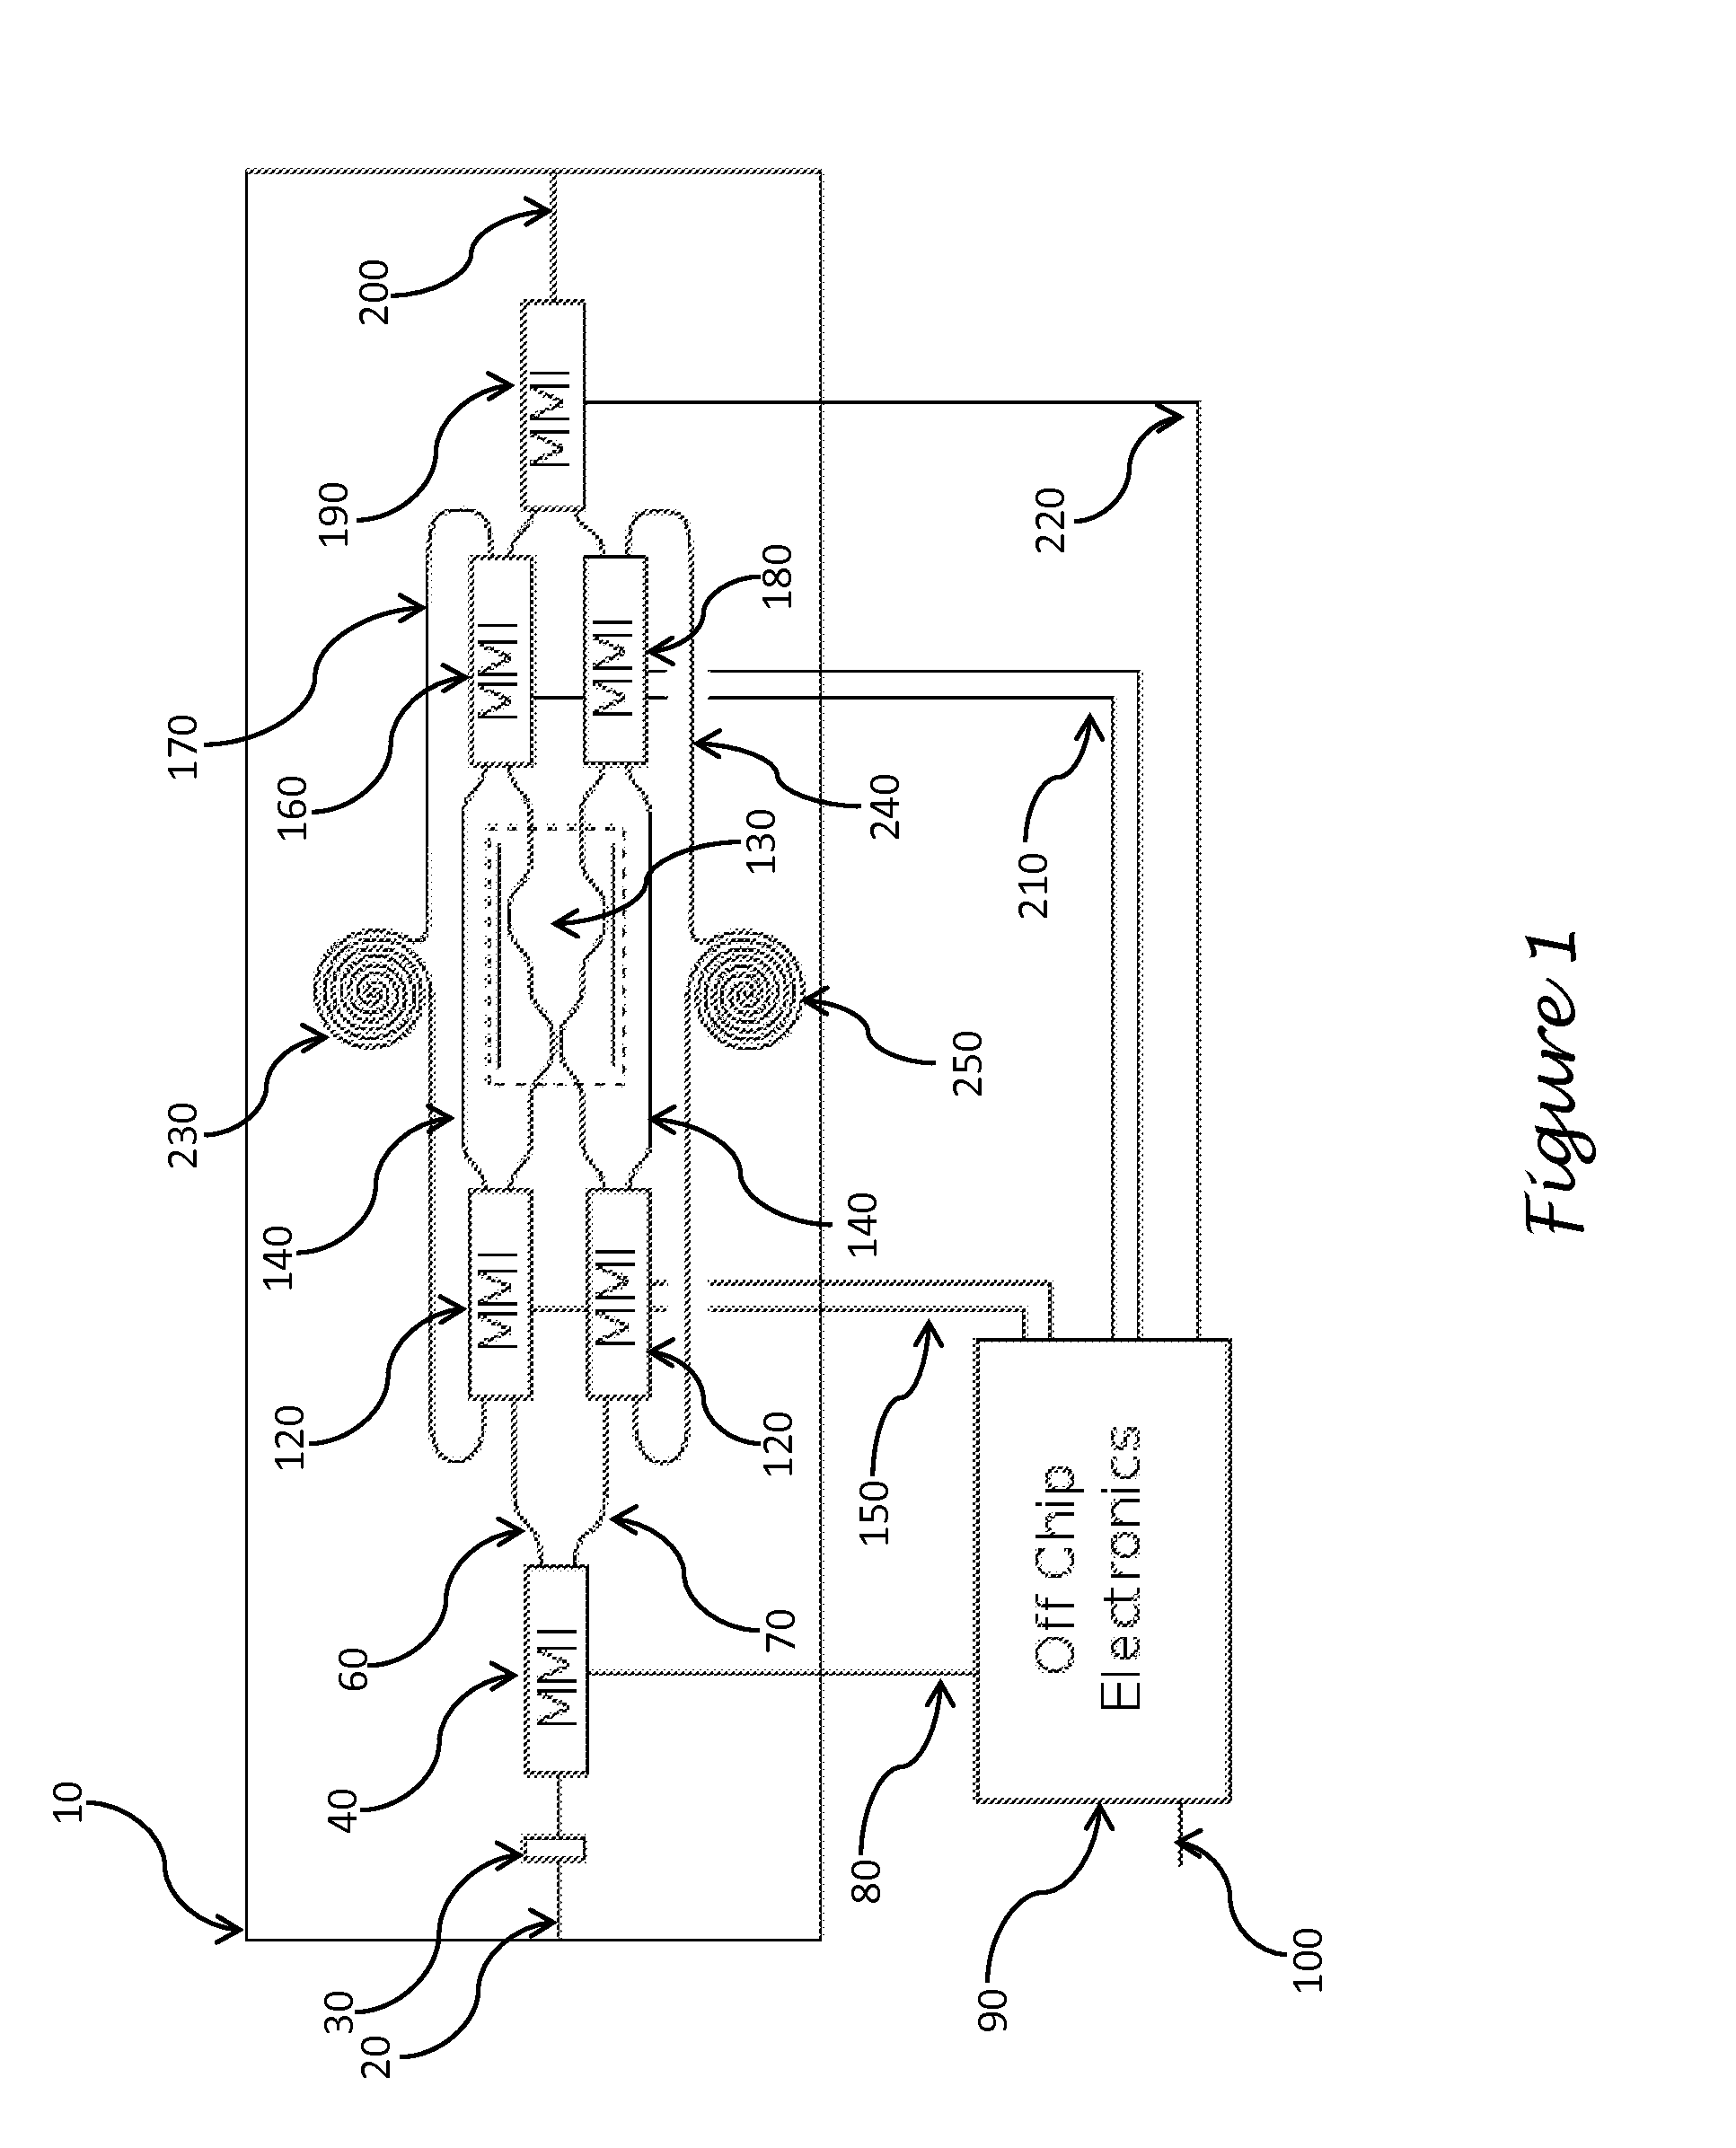 Apparatus and method for a symmetric sequential entangler of periodic photons in a single input and output mode